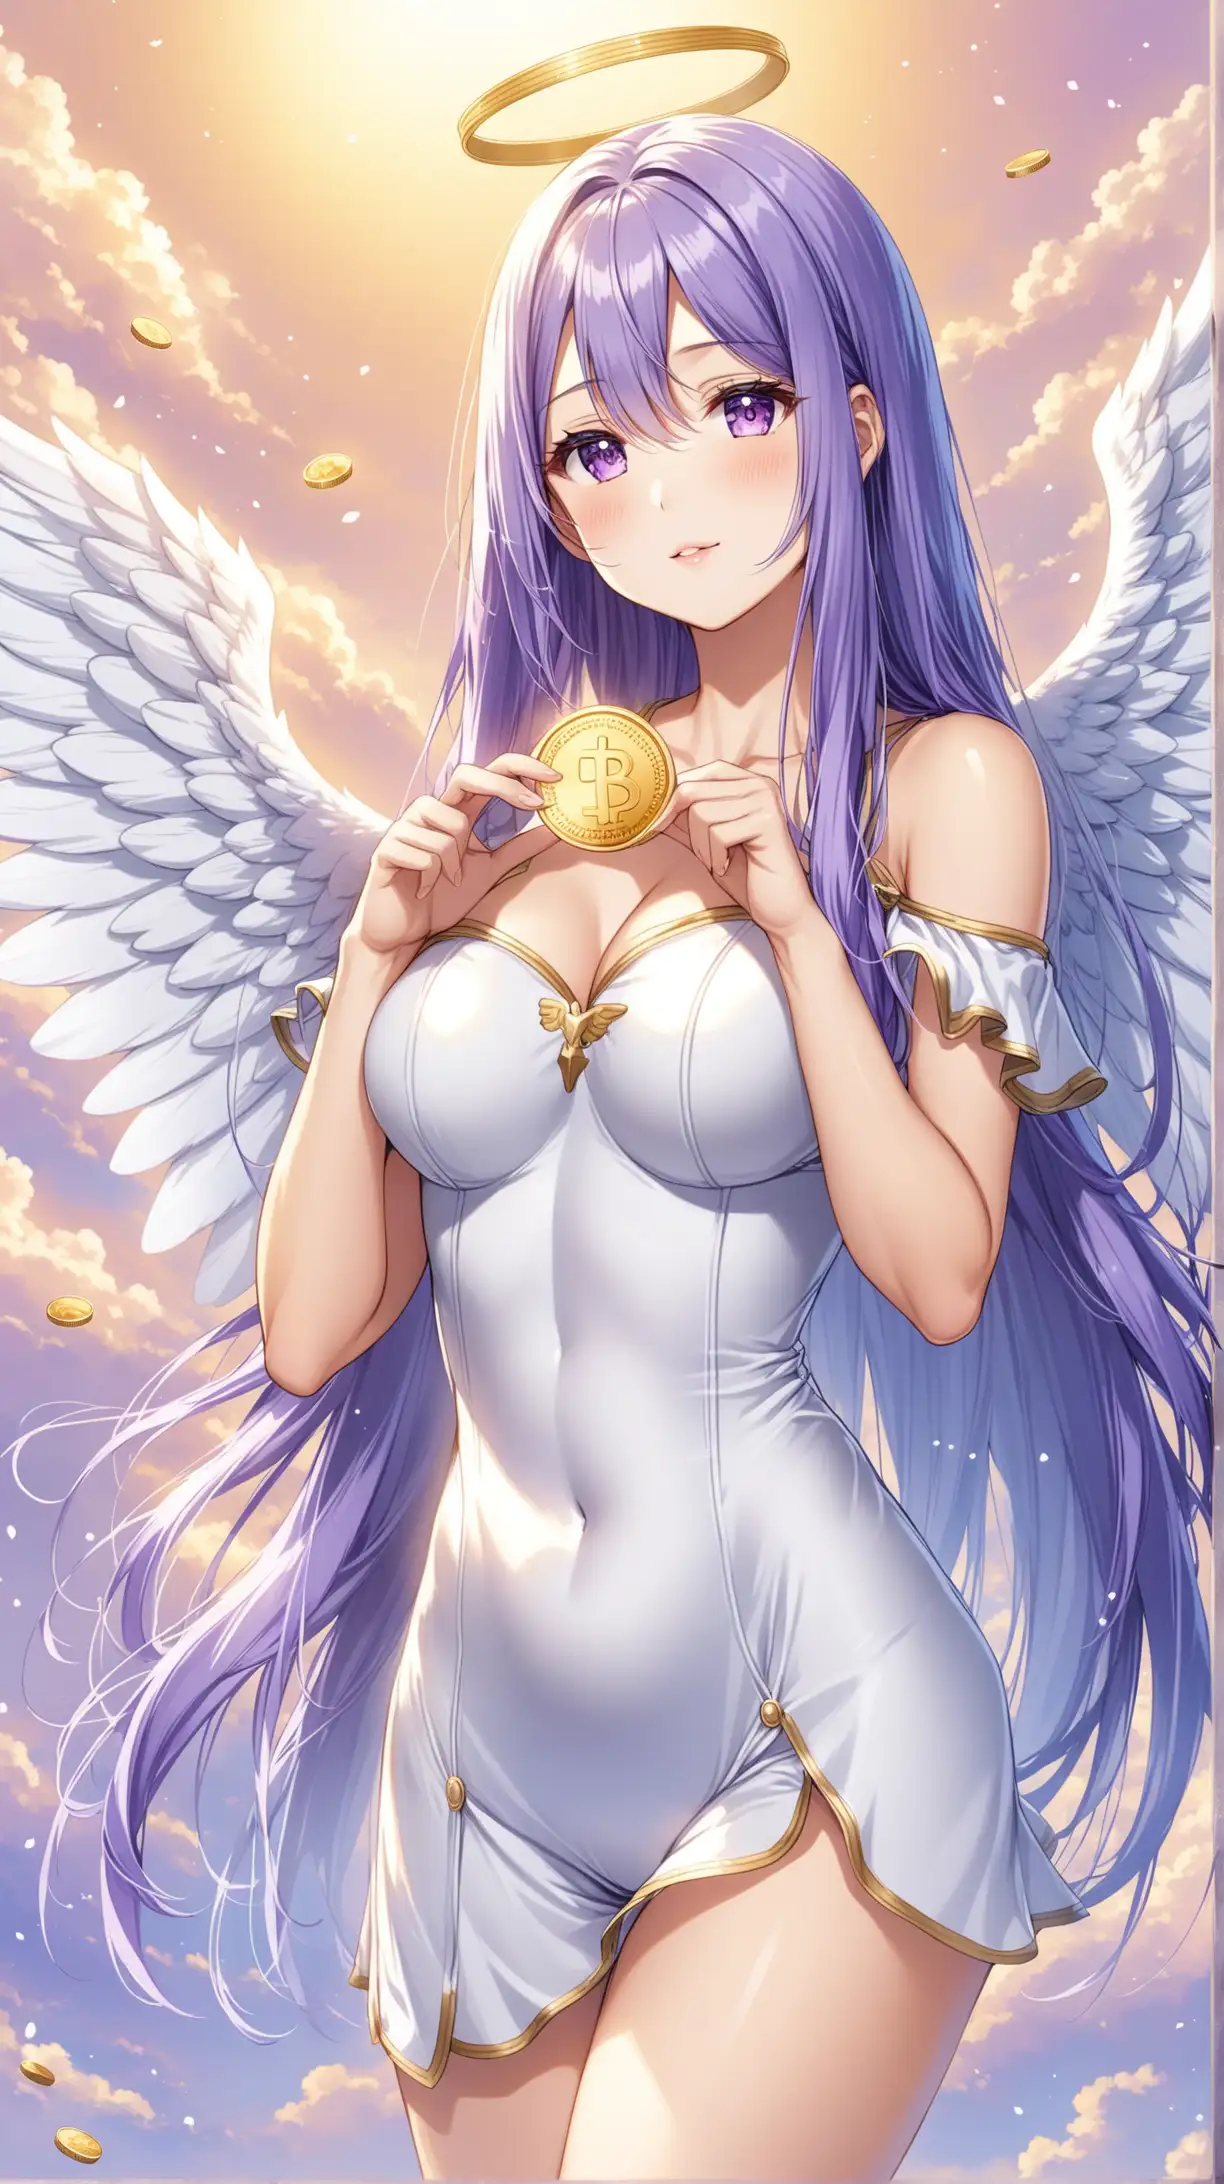 Enchanting Angel with Coin Mesmerizing Grey Angel in Purple Hair and Wings